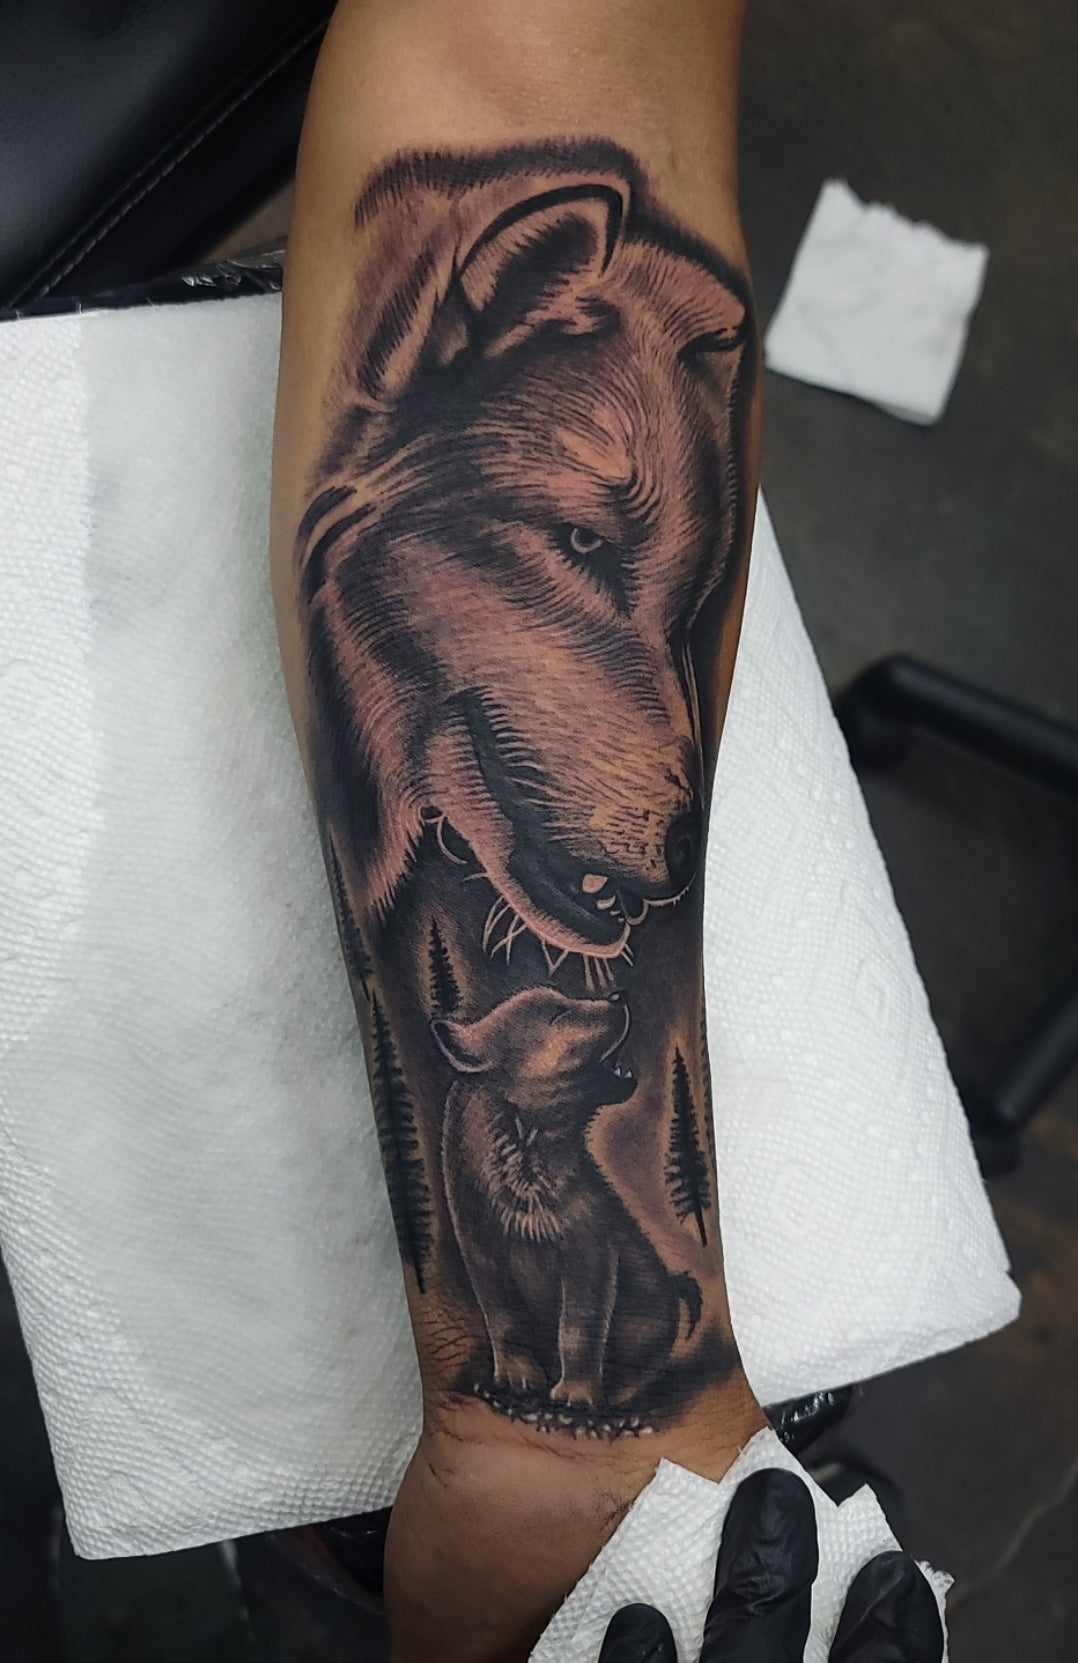 Full Day Tattoo Session Lower Arm